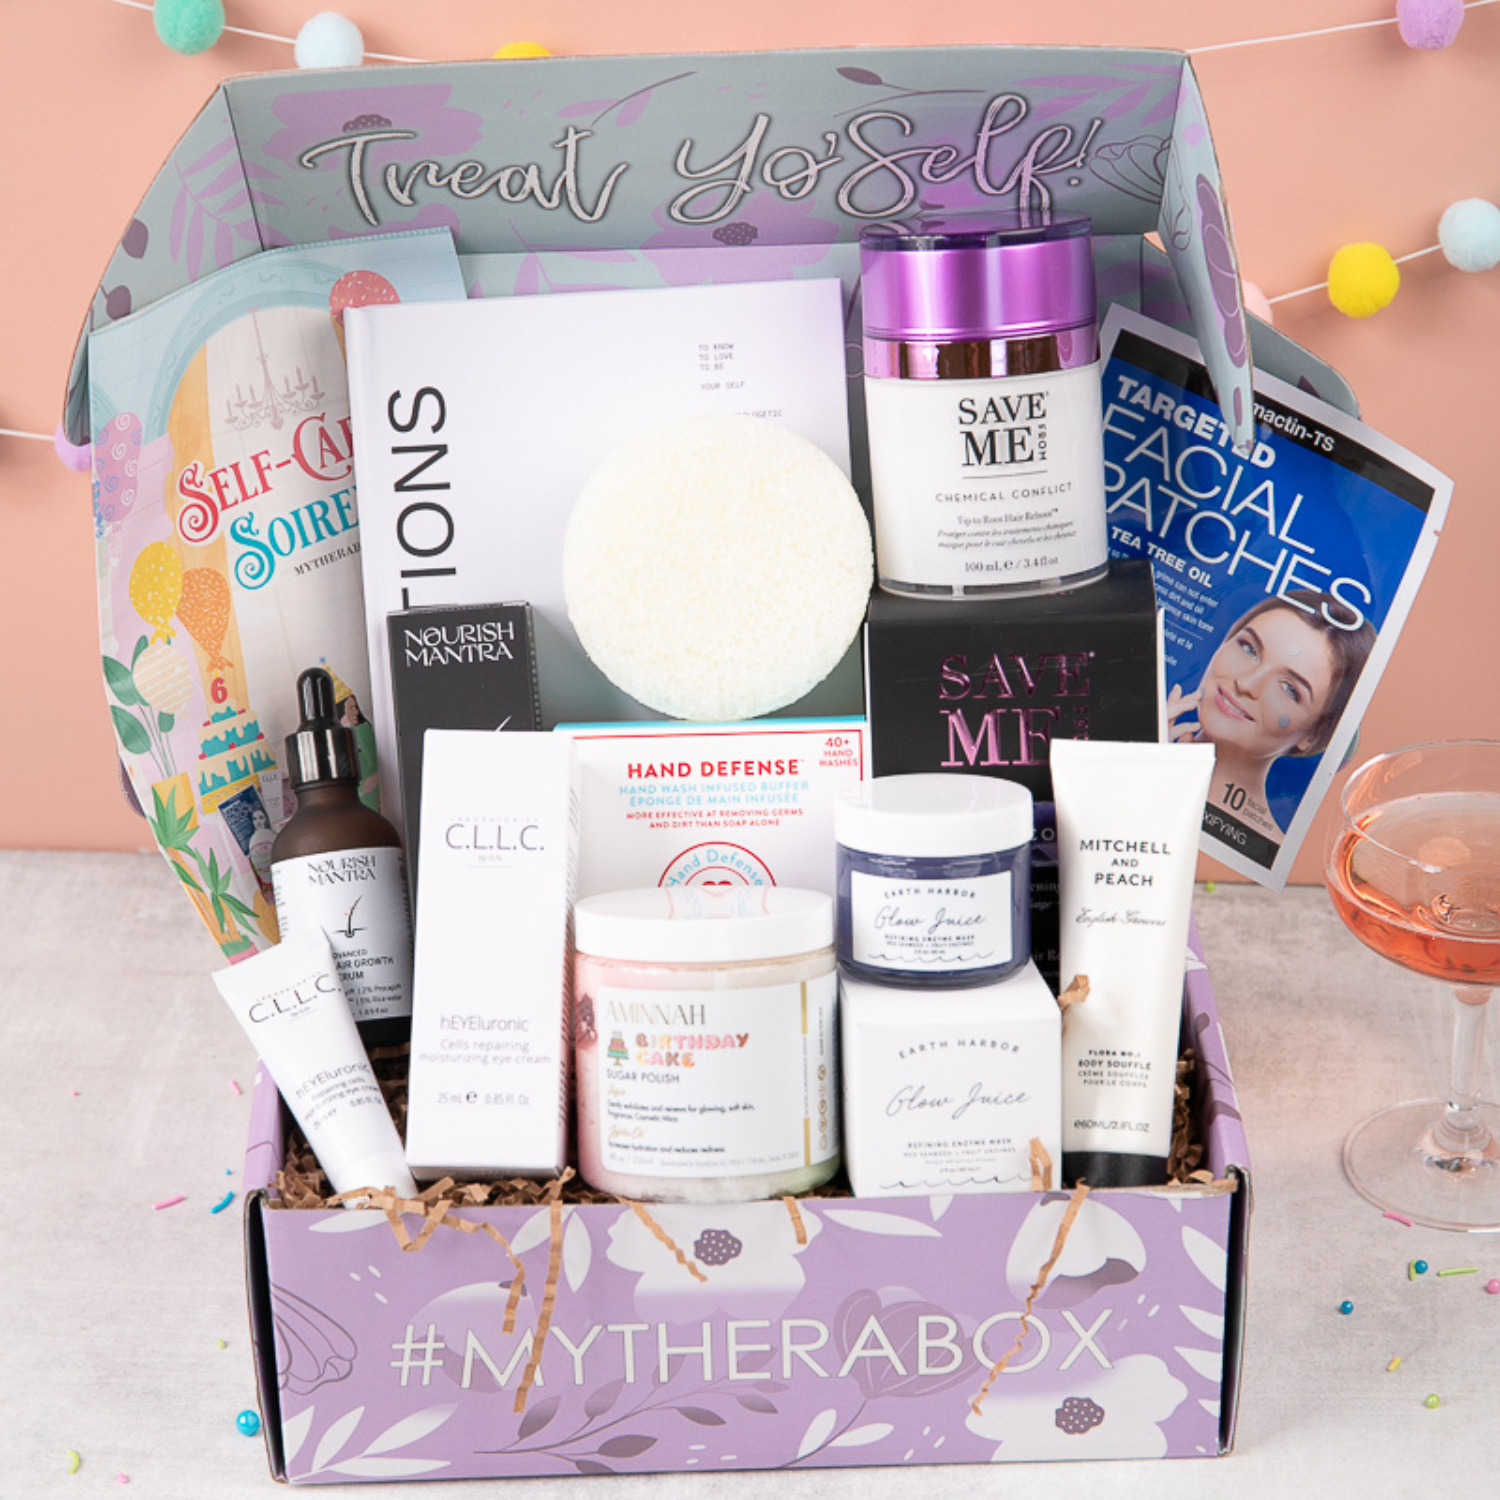 FULL REVEAL OF SELF CARE SOIREE BOX – Therabox - Self Care Subscription Box